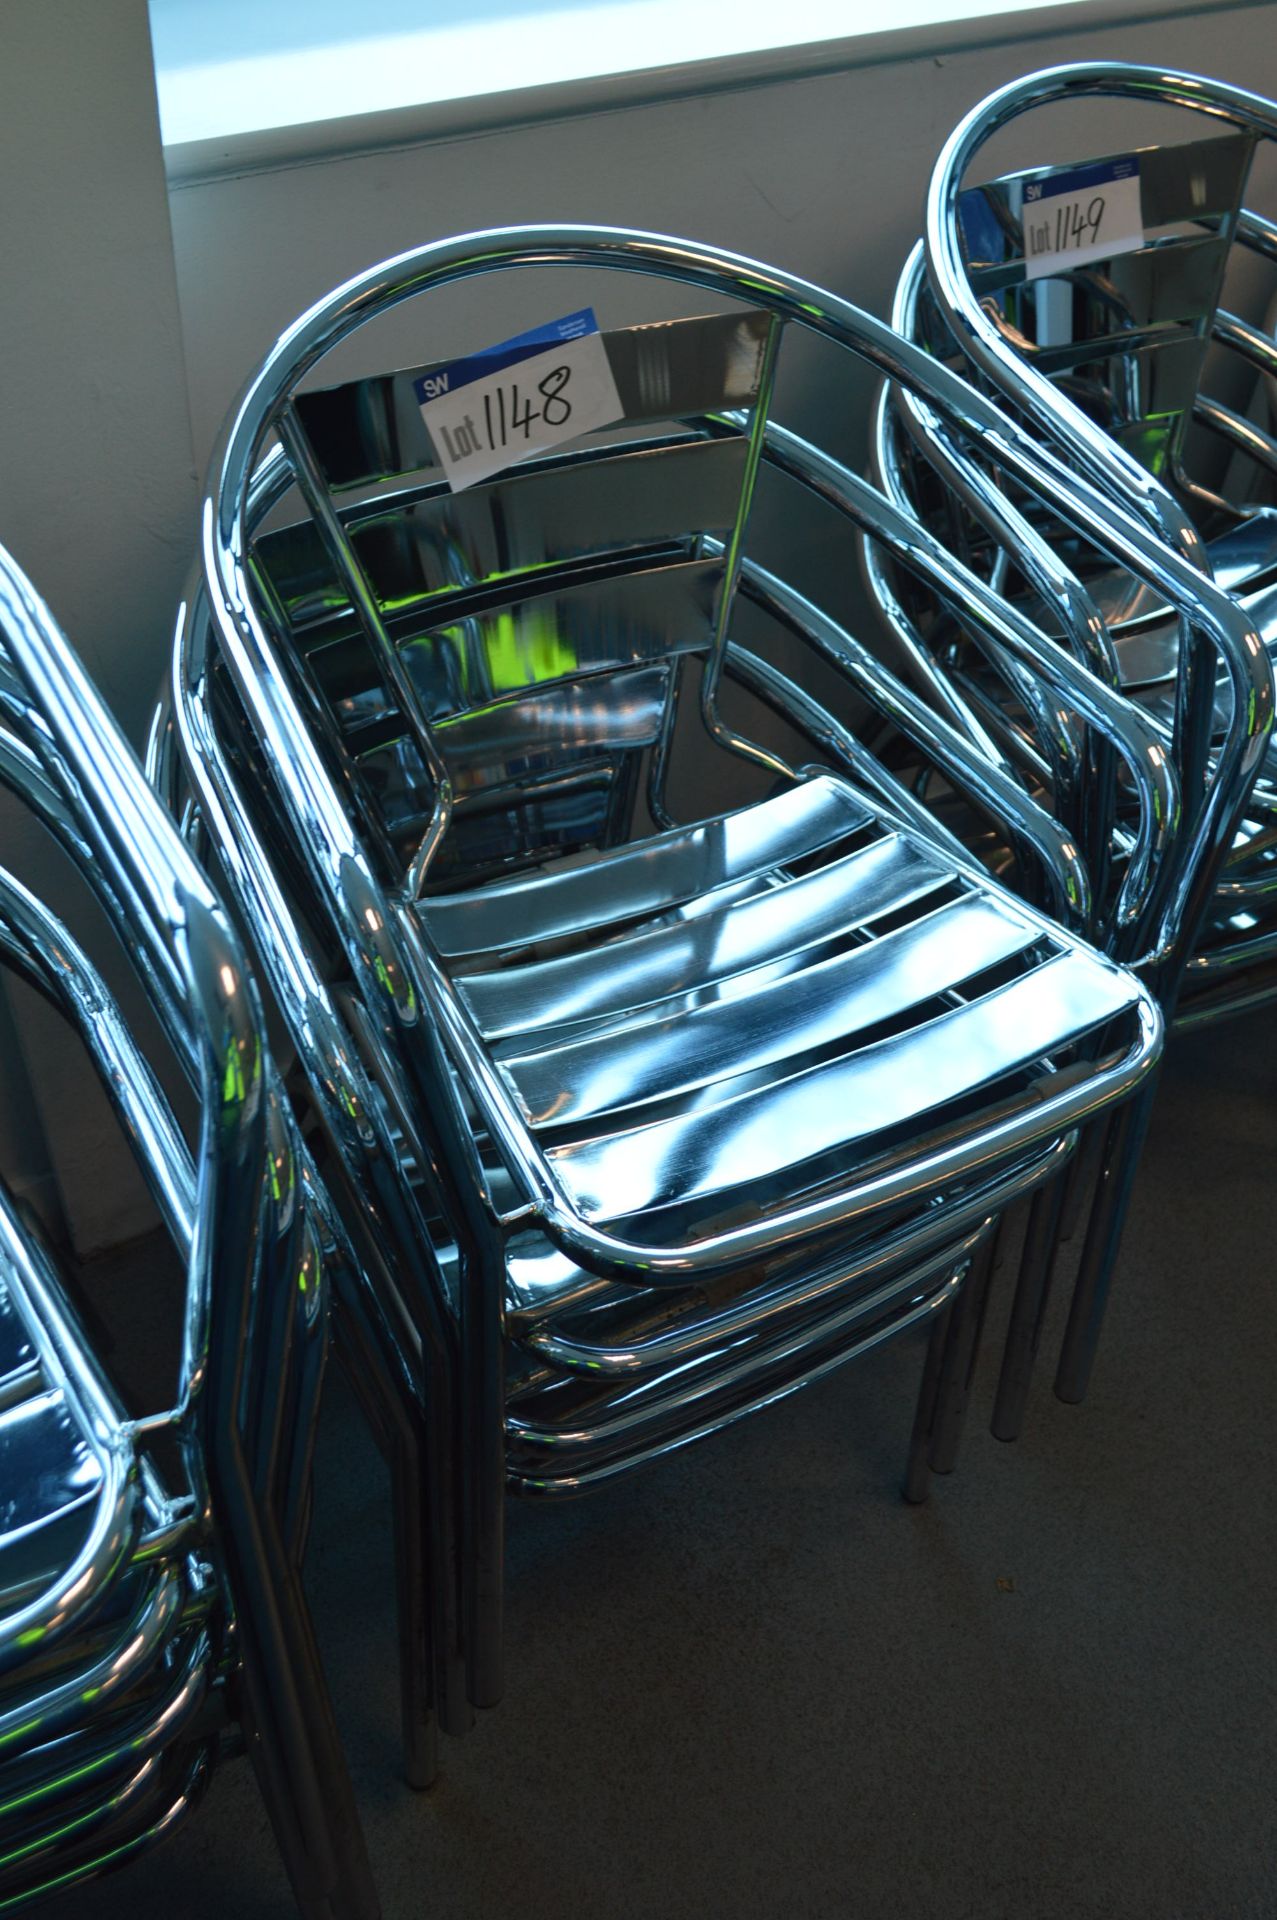 Four Steel Framed Canteen Chairs